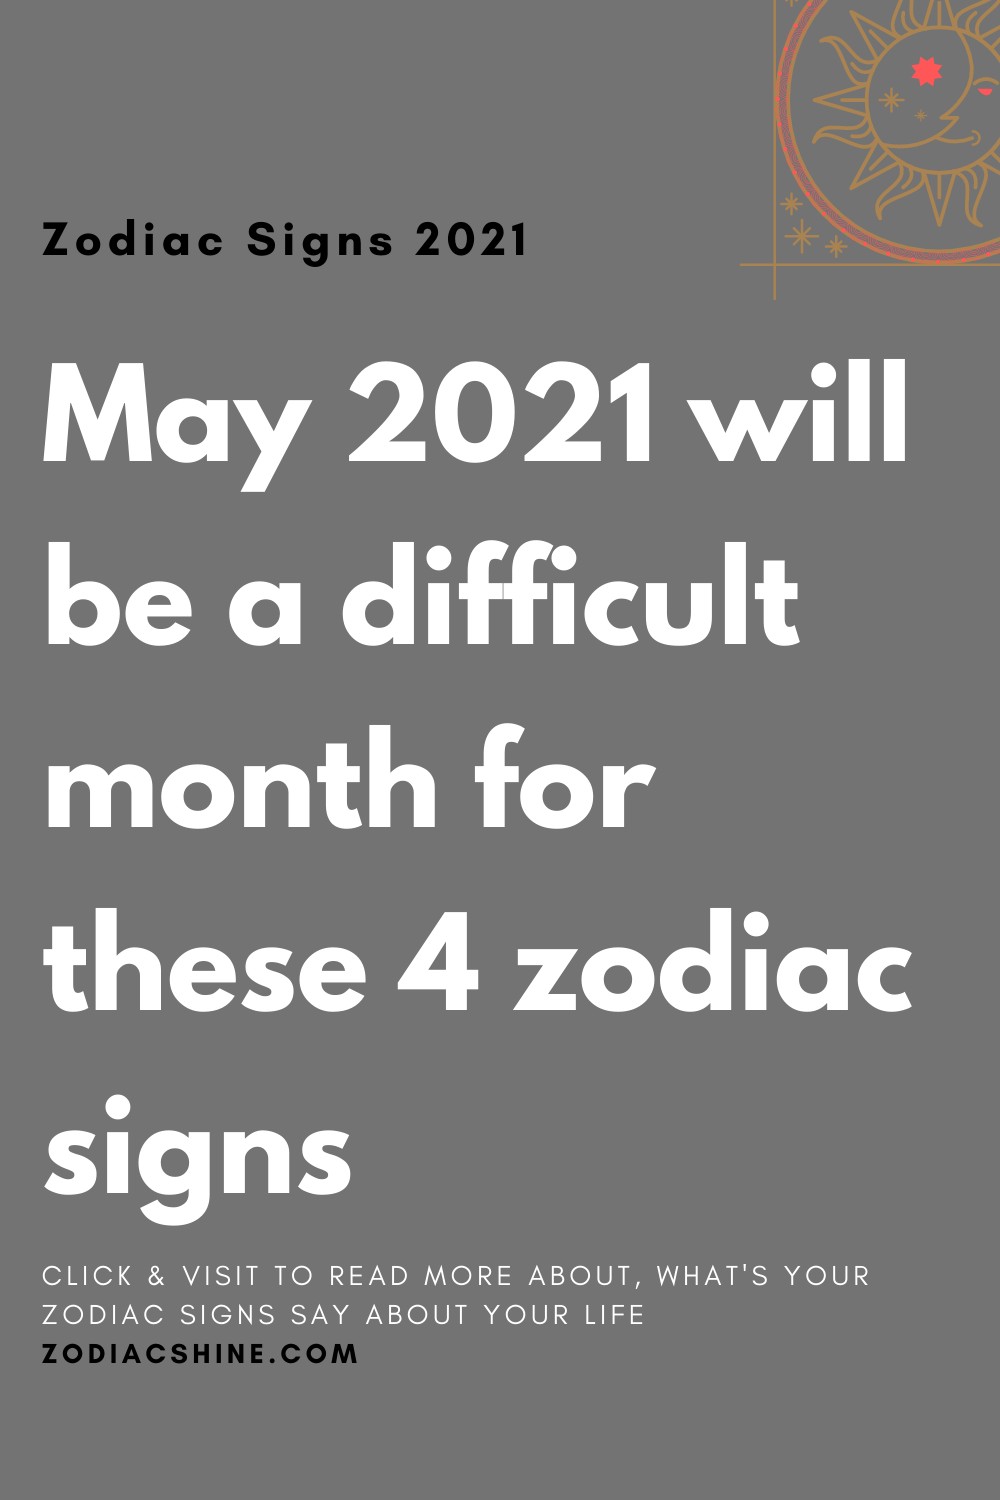 May 2021 will be a difficult month for these 4 zodiac signs